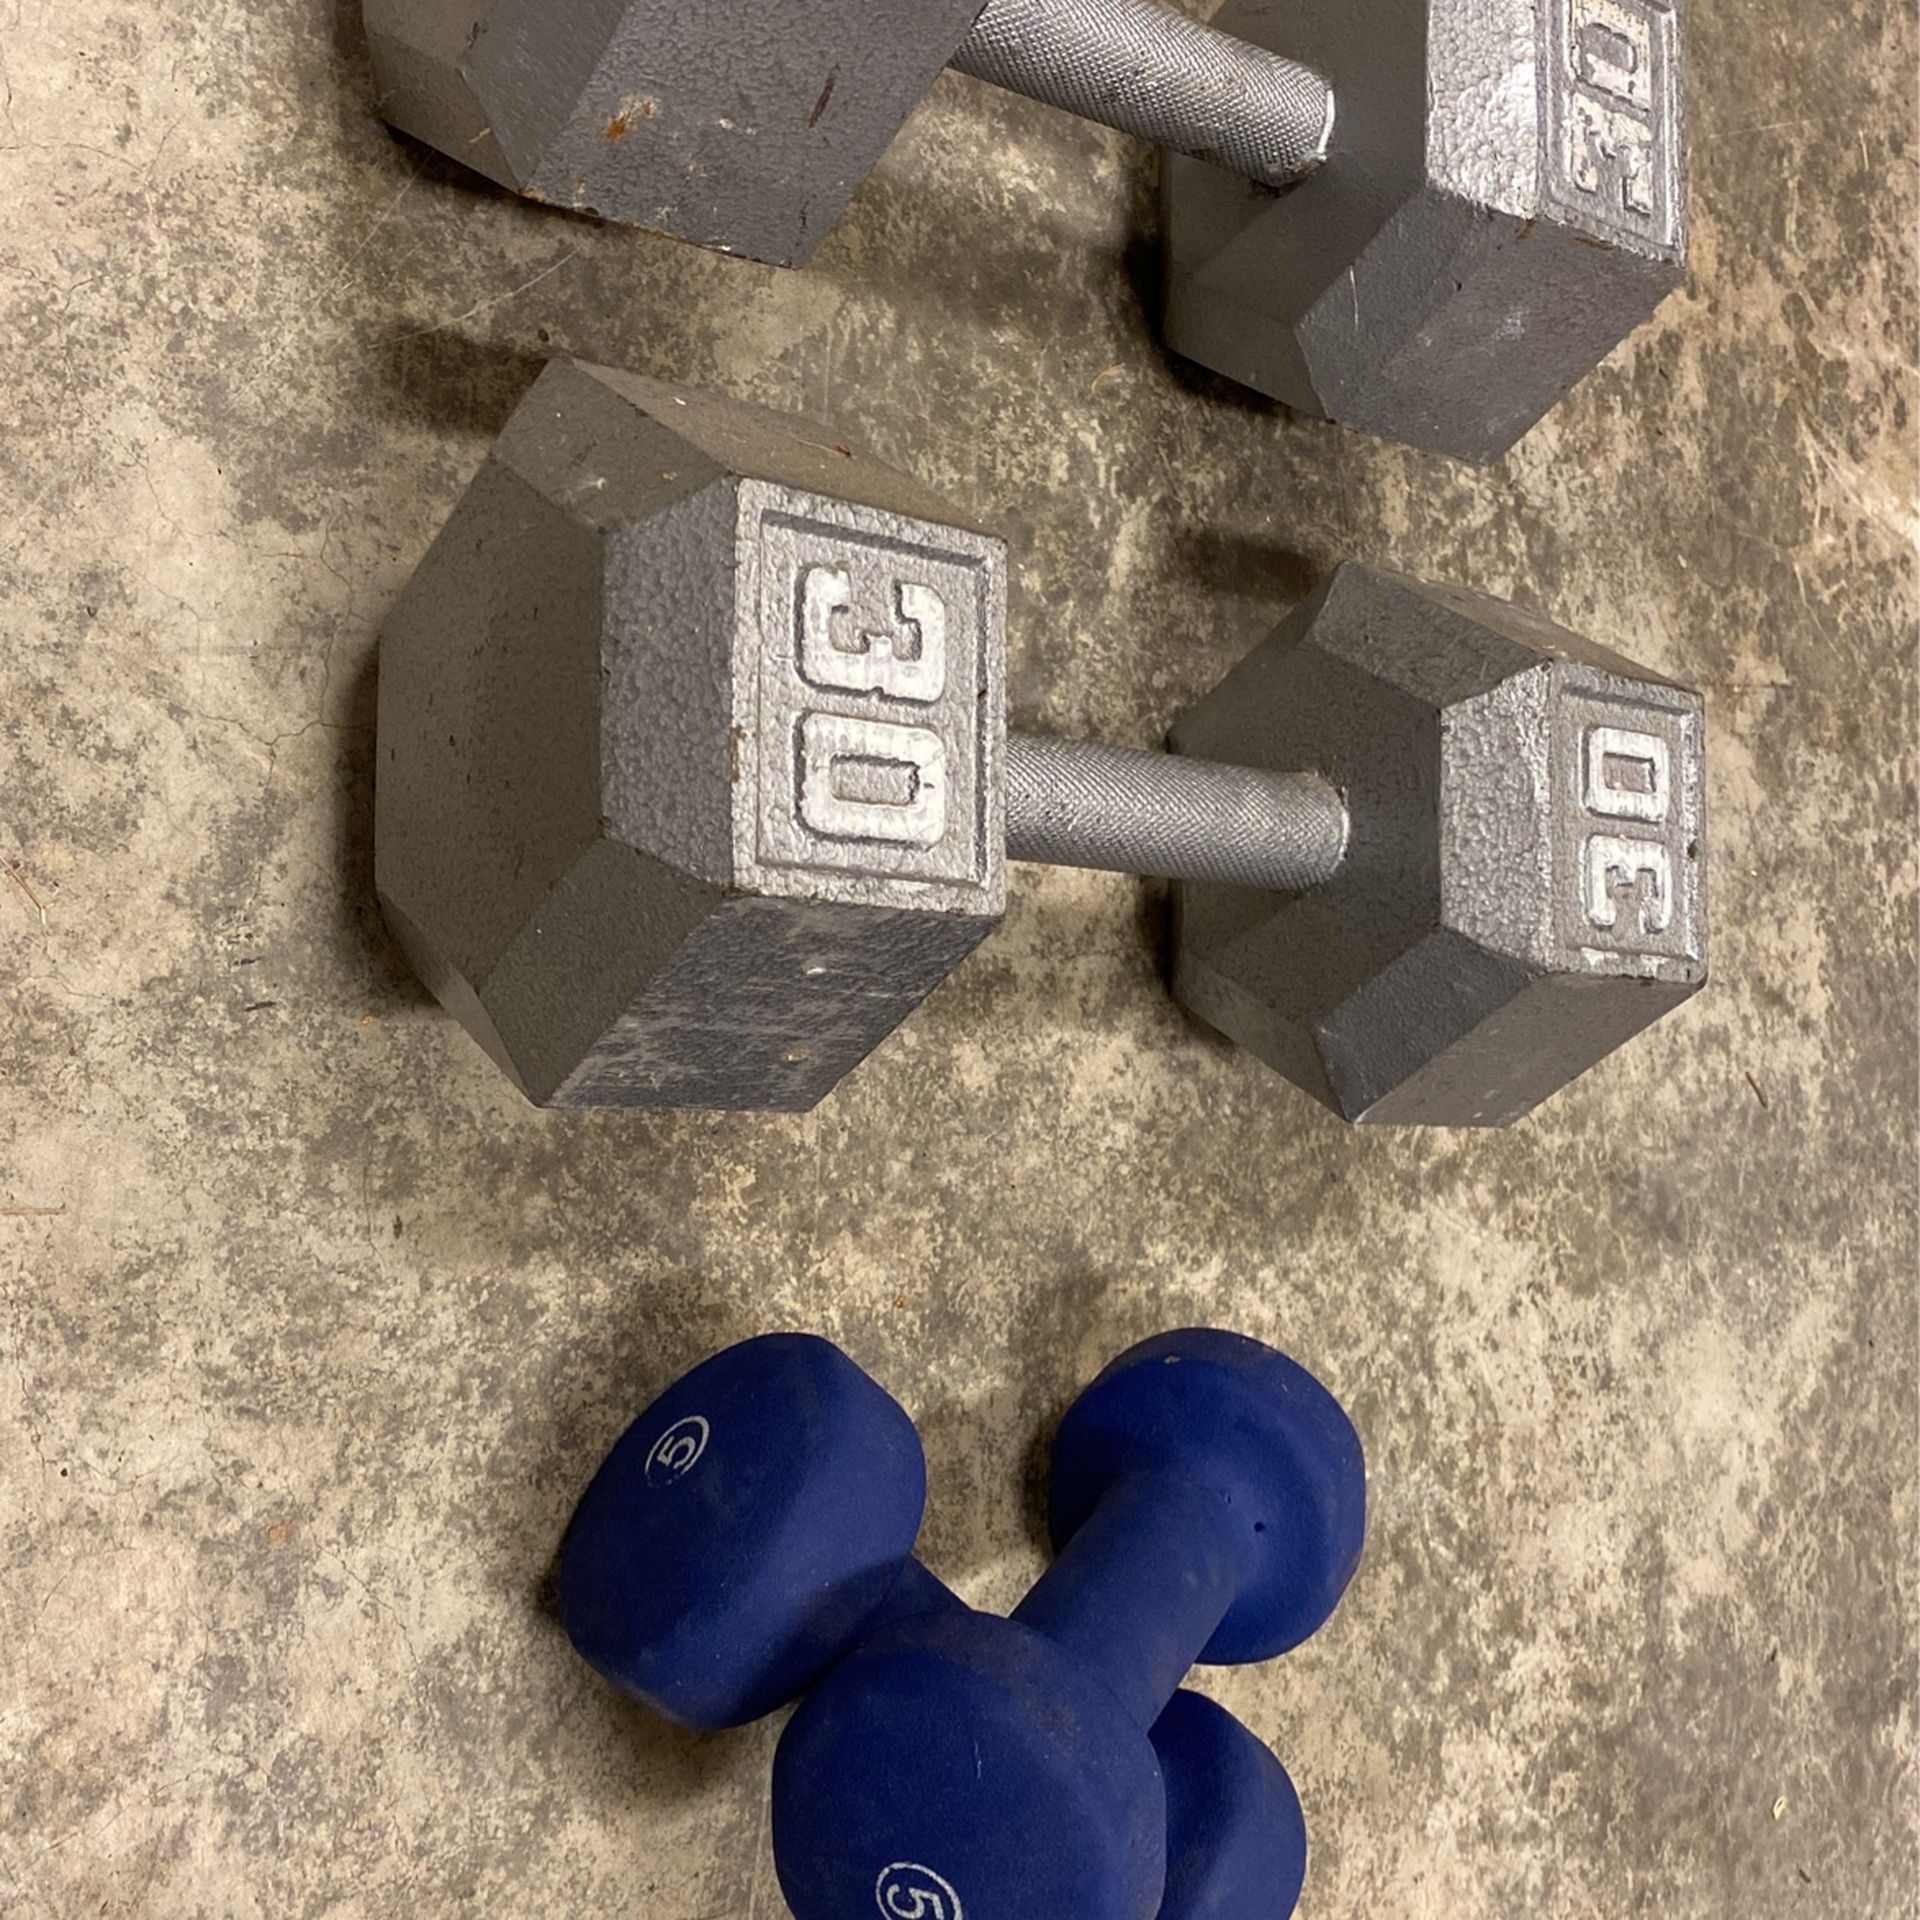 Weights Dumbbells 2x30lbs And 2x5lbs